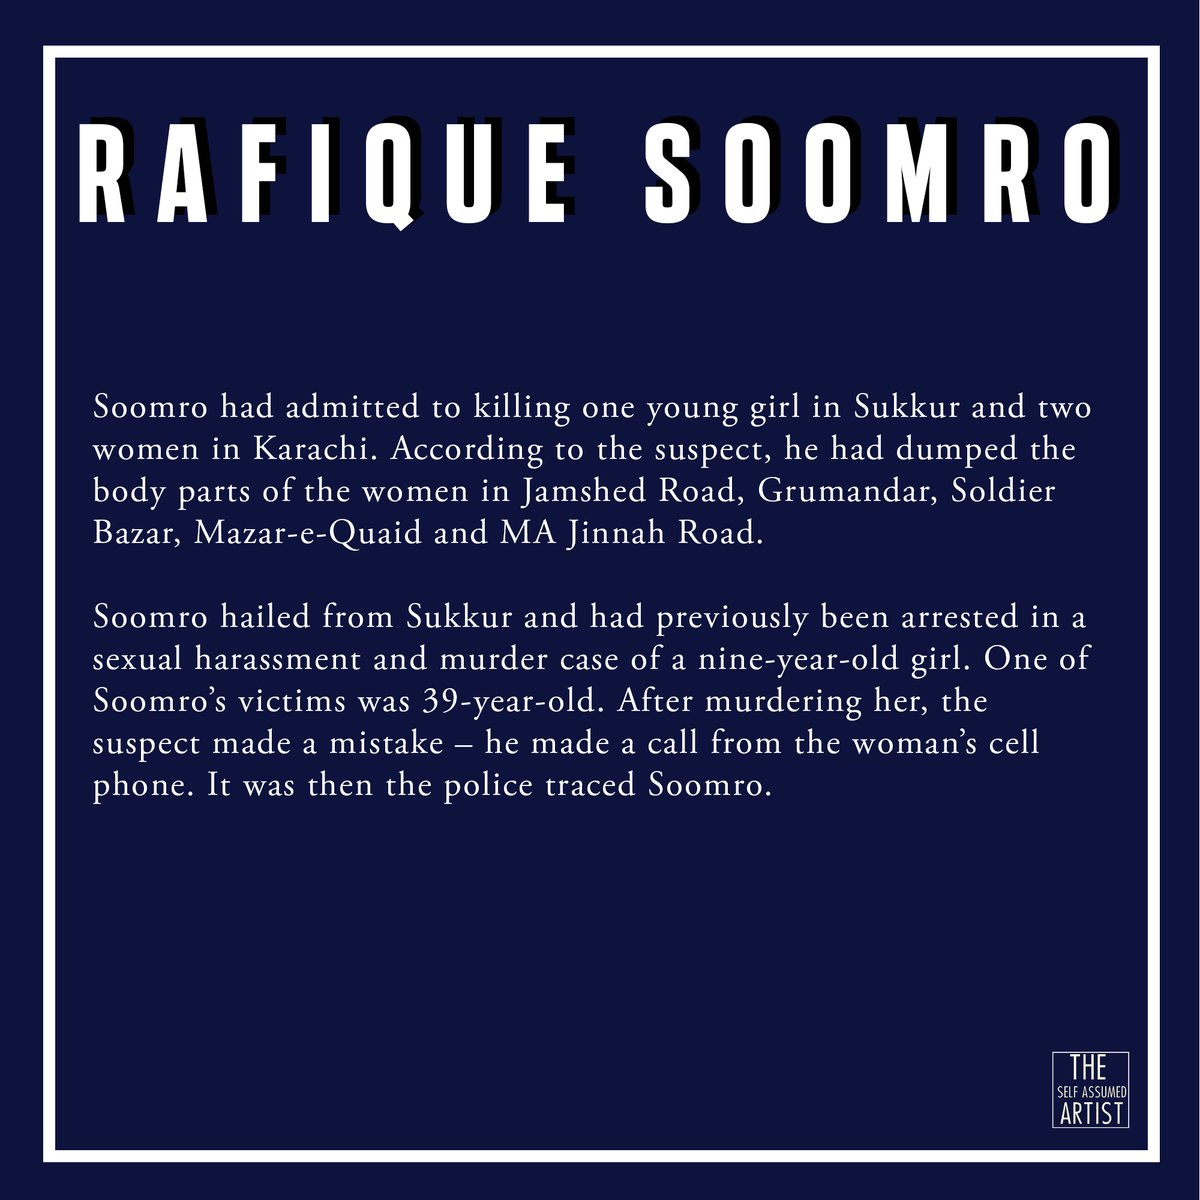 Rafique Soomro, a rickshaw driver, raped and killed multiple women in 2012. He followed the pattern of committing the crimes on every 9th of the month. He was caught after making a call from one of the victim's cellphone which was traced back to him.